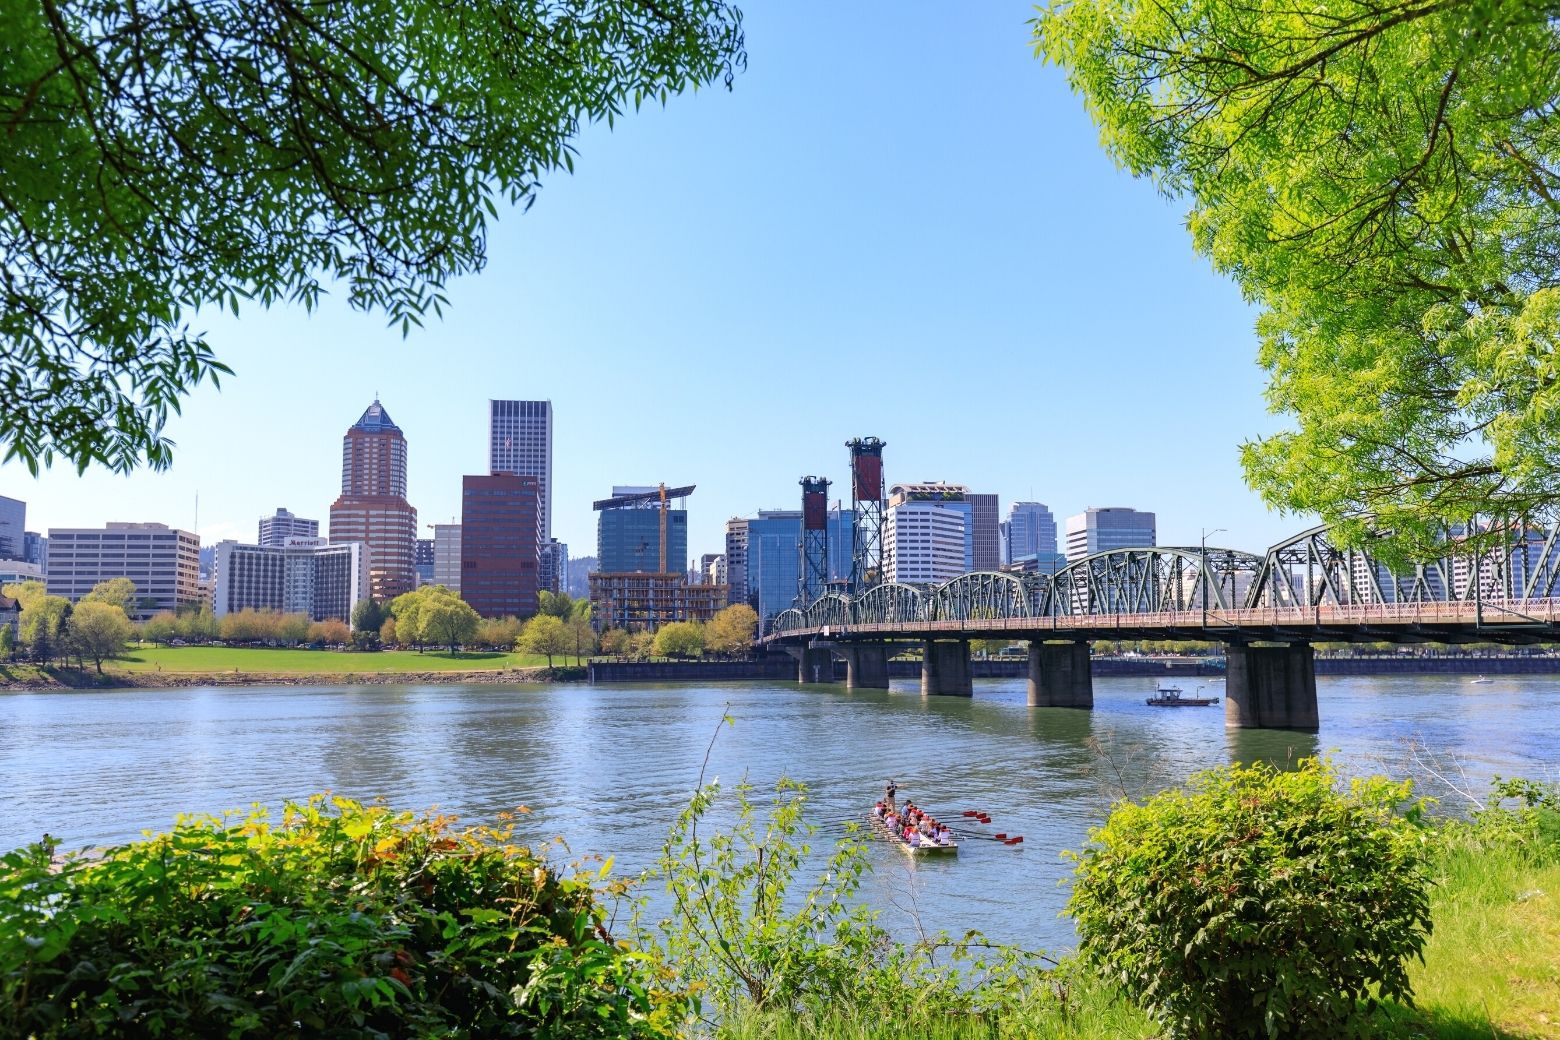 The Top 7 Pre-Listing Updates for Portland Homes